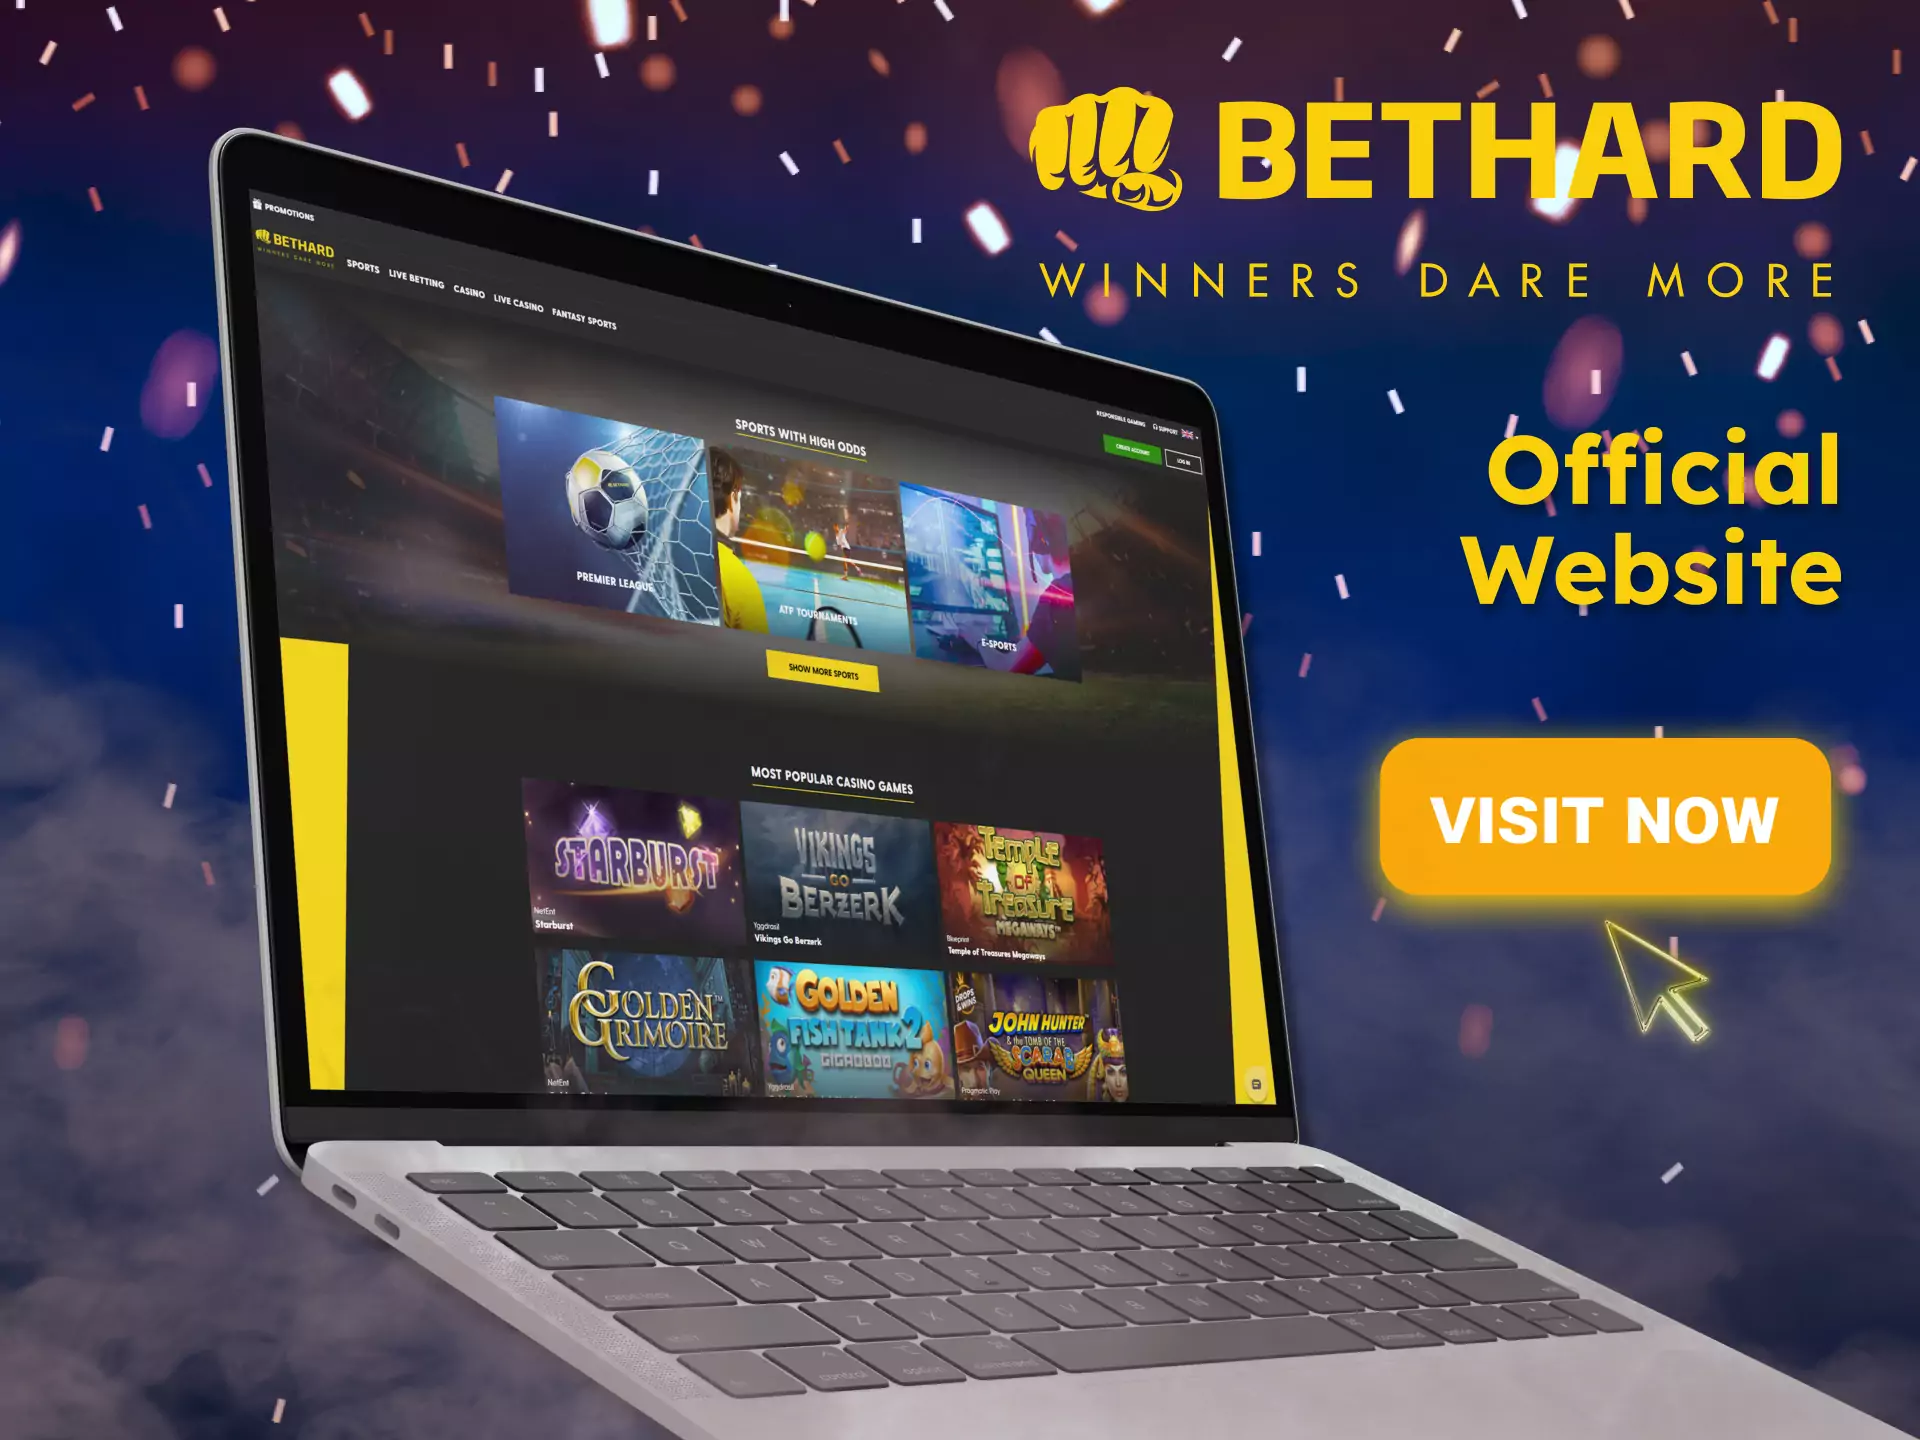 The official website of Bethard offers players a wide range of functions.